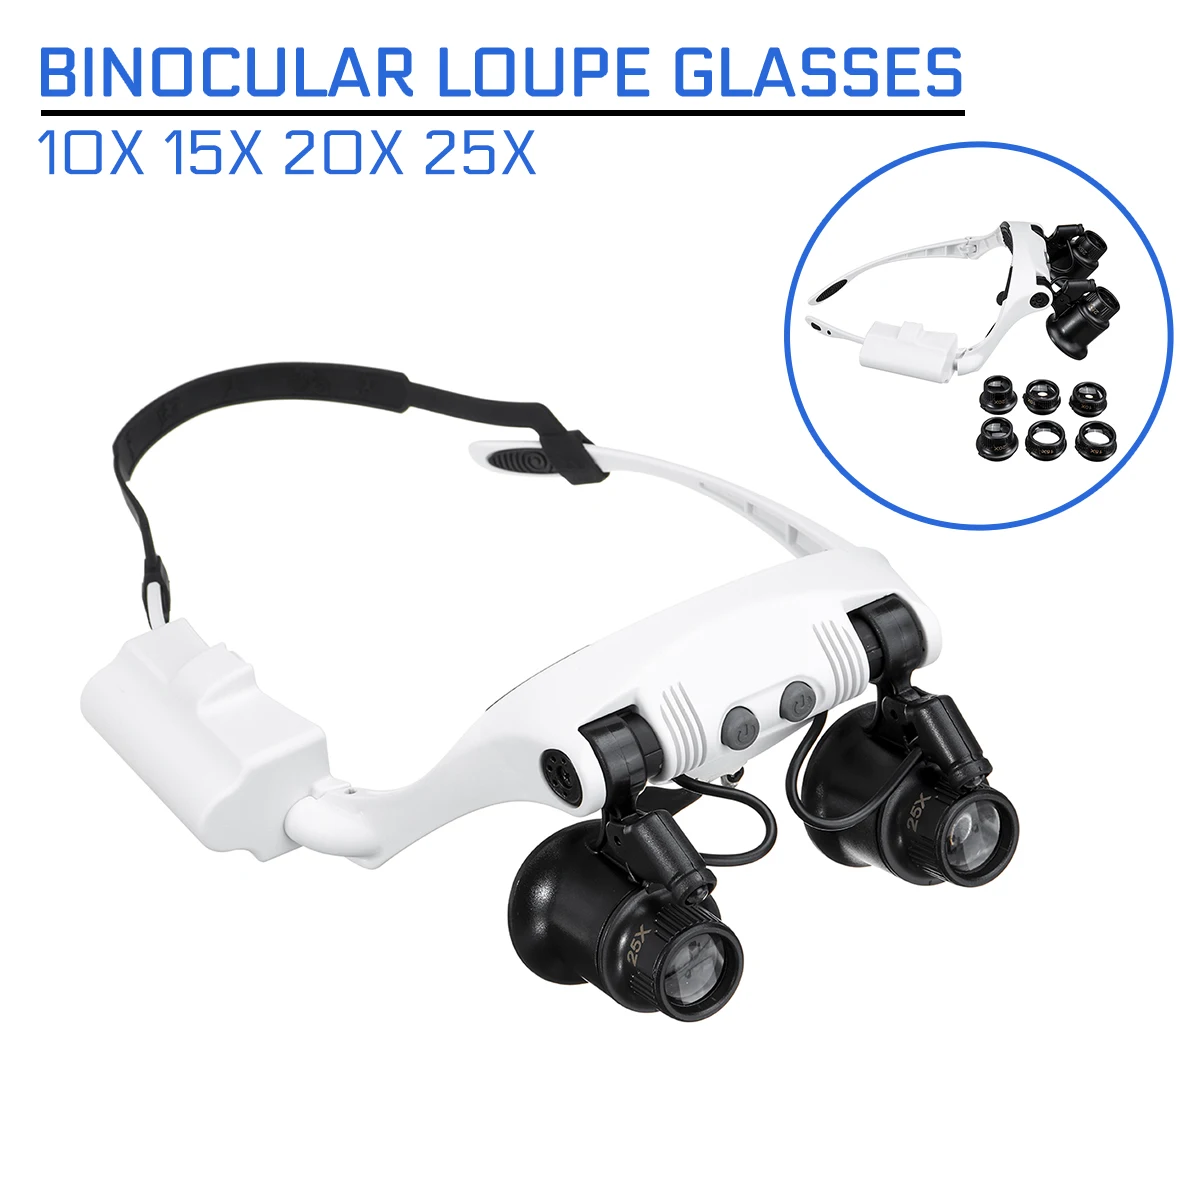 10X 15X 20X 25X LED Magnifier Double Eye Glasses Loupe Lens Professional Jeweler Watch Repair Measurement with 8 Lens LED lamp